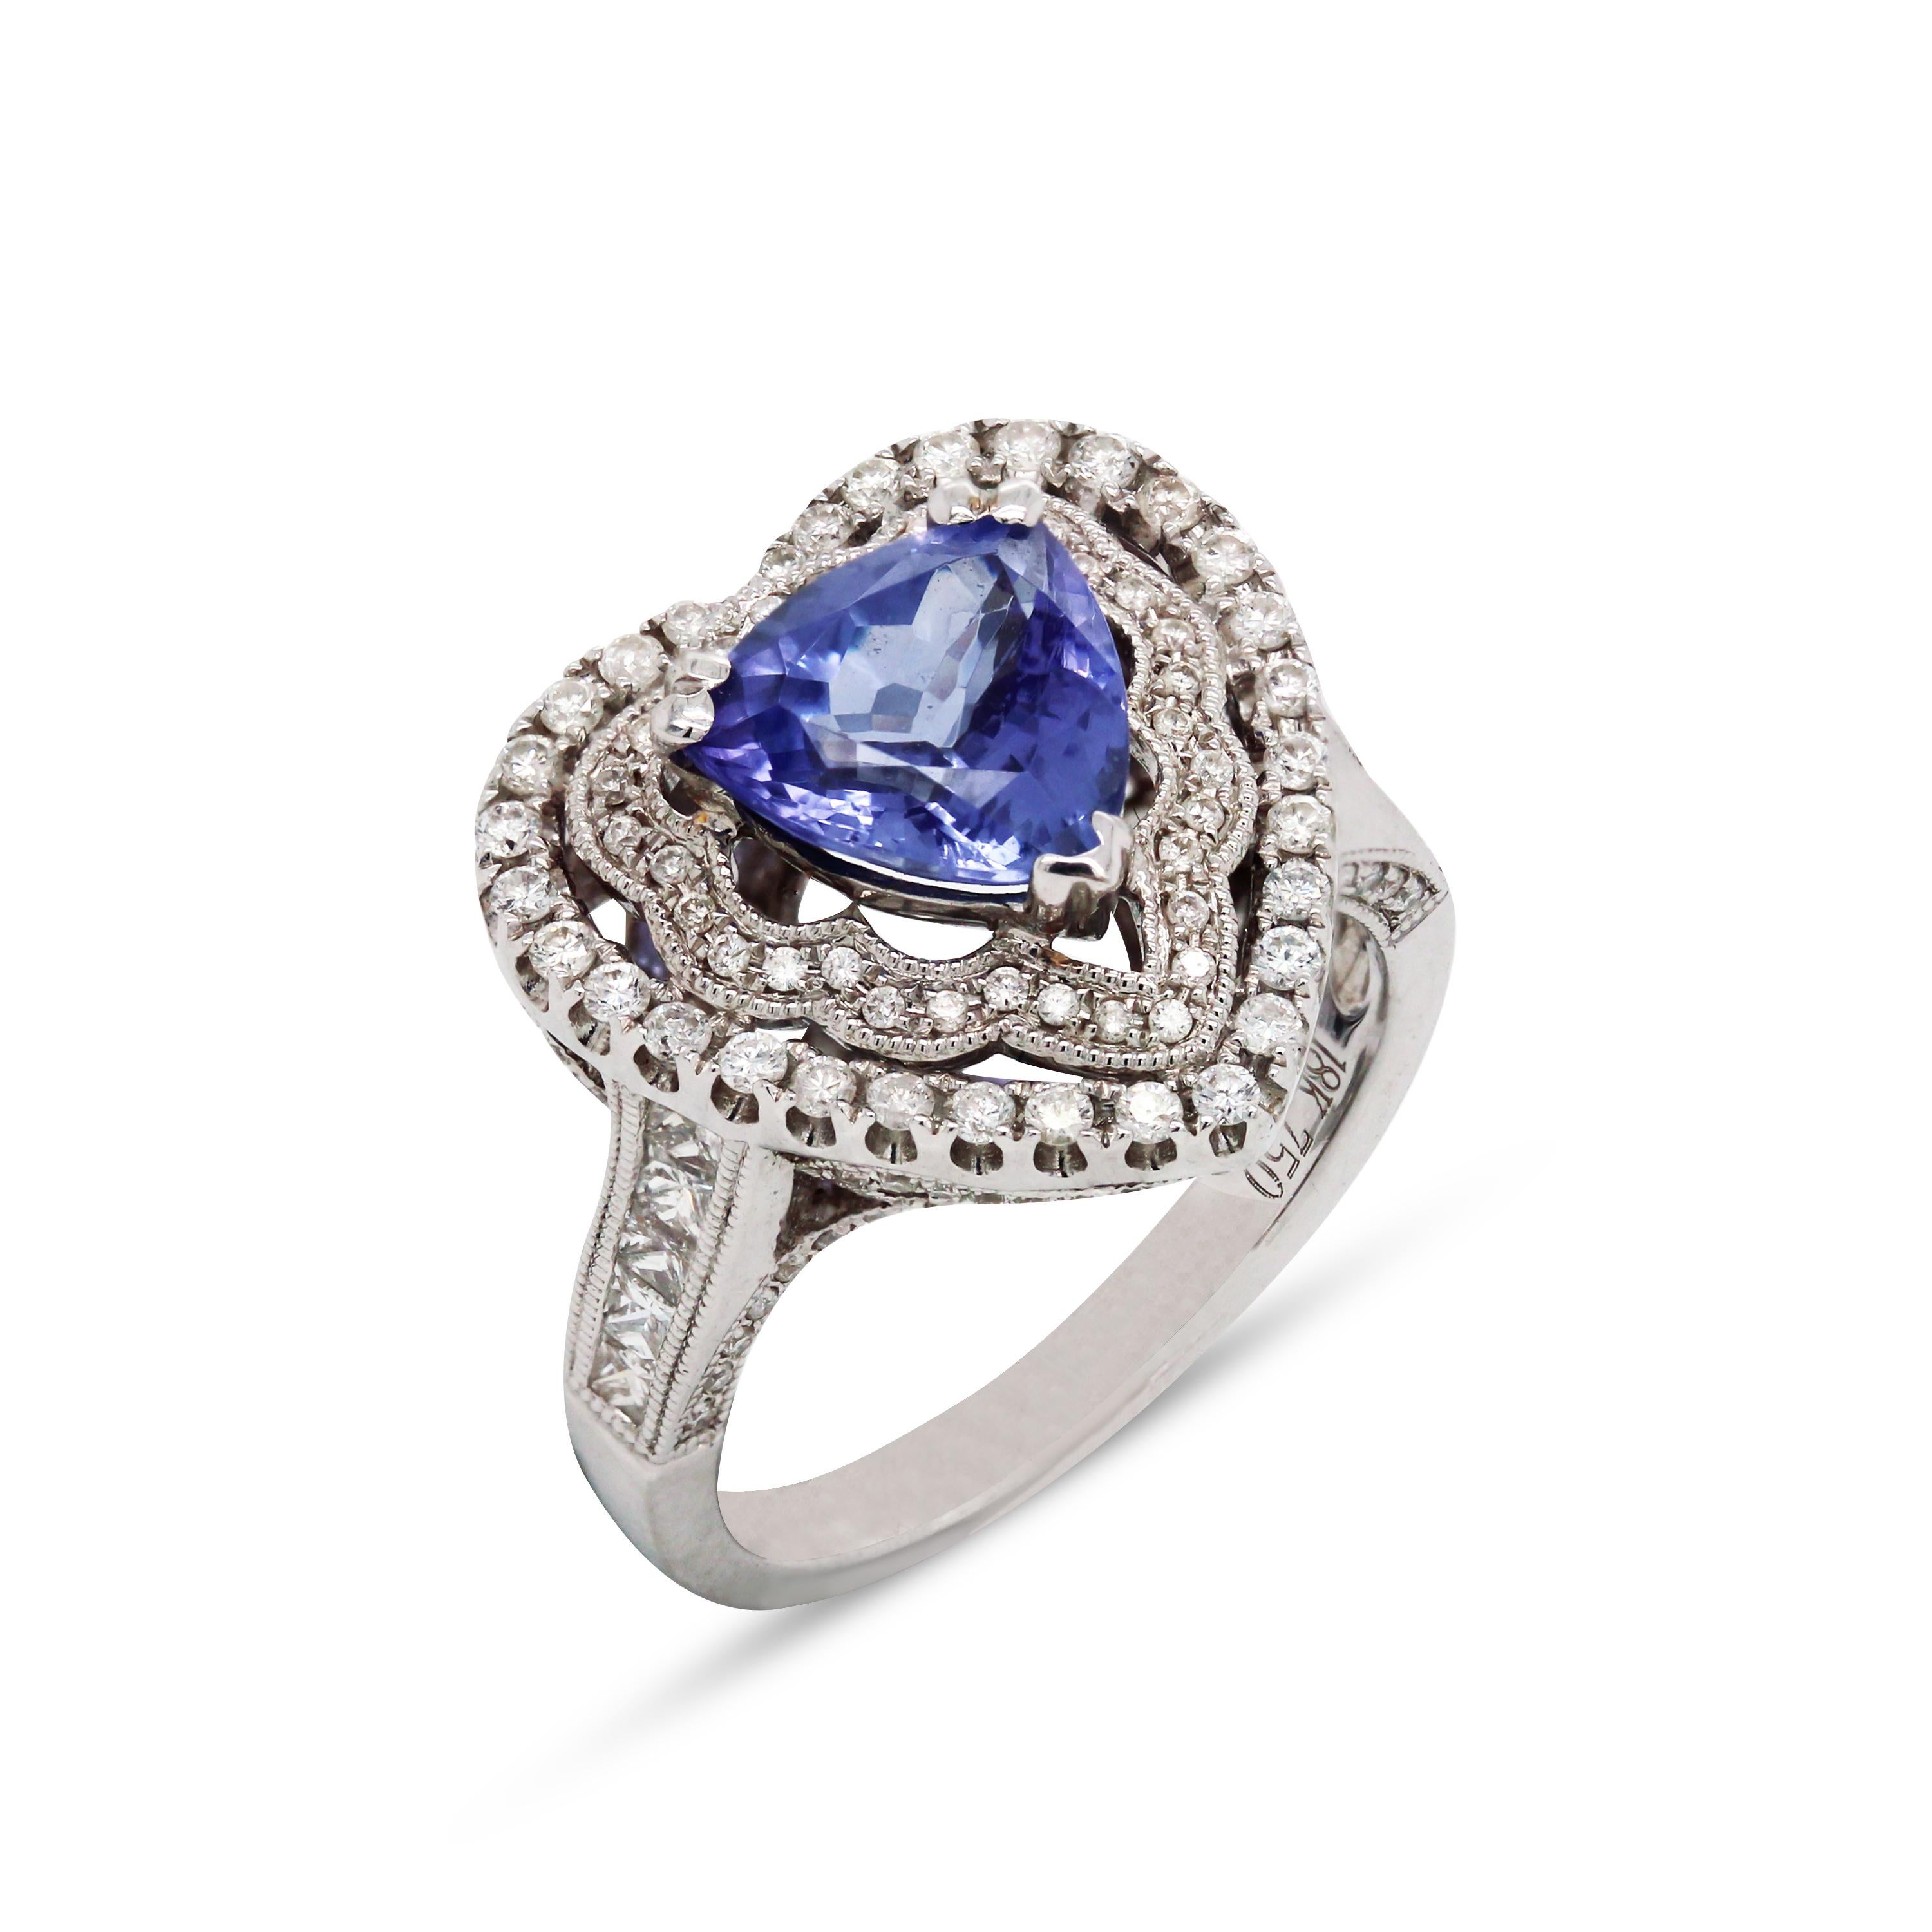 18K White Gold and Diamond Heart Shape Cocktail Ring with Trillion-Cut, Tanzanite Center

This ring features a double-row of diamonds in the center surrounding the Tanzanite

Diamonds are also set half-way on the band.

0.85 carat apprx., H color,